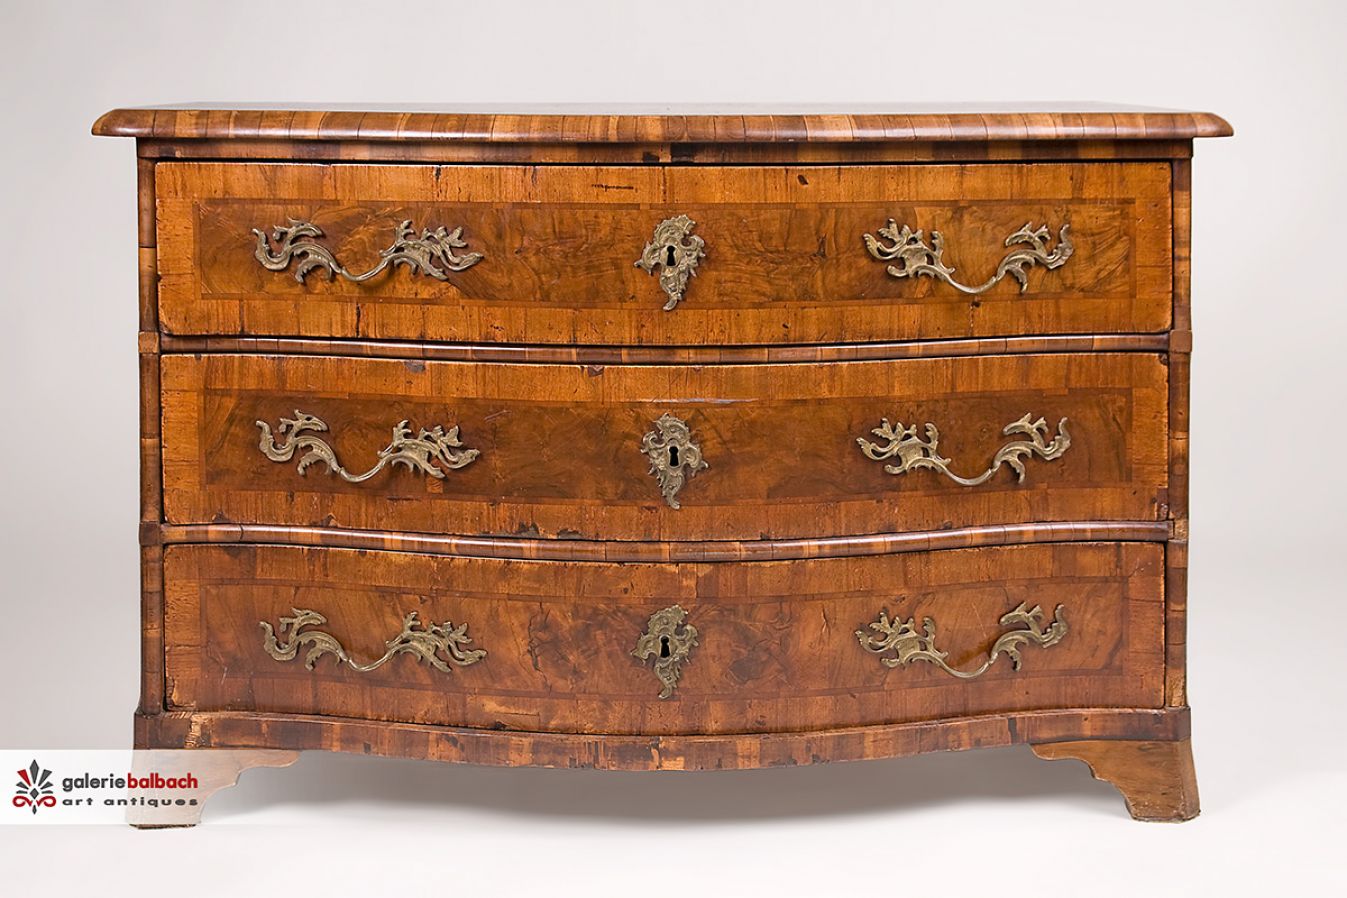 Restoration of an antique chest of drawers